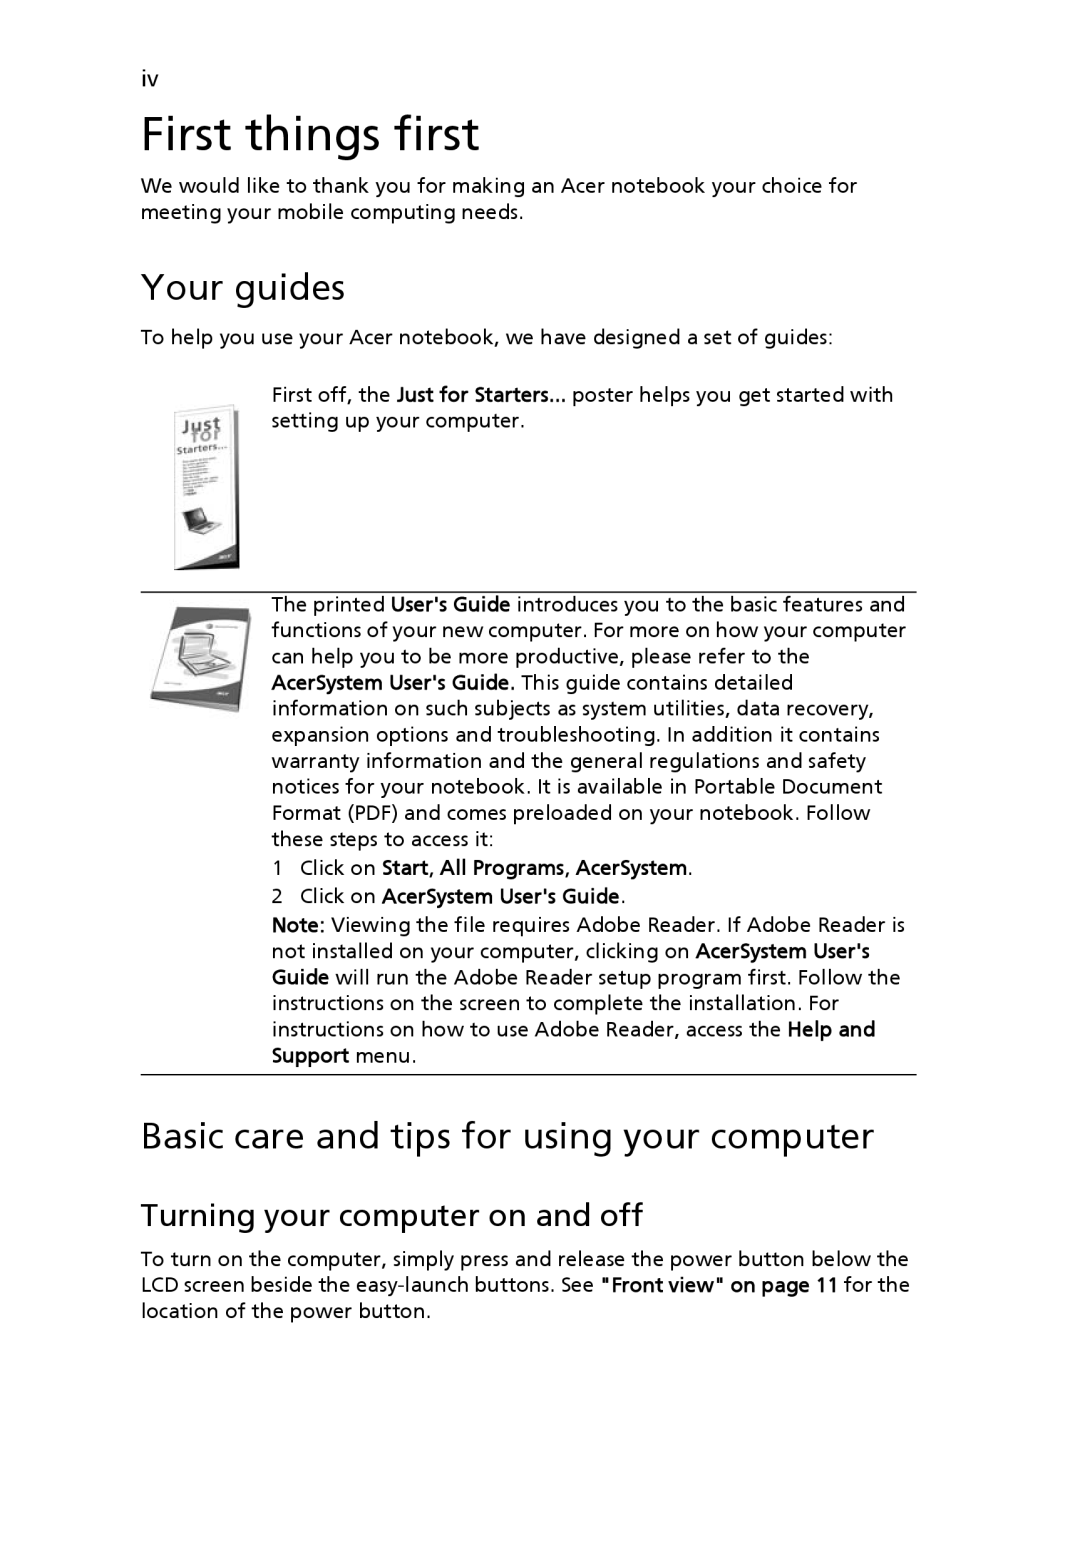 Acer 4070 First things first, Your guides, Basic care and tips for using your computer, Turning your computer on and off 